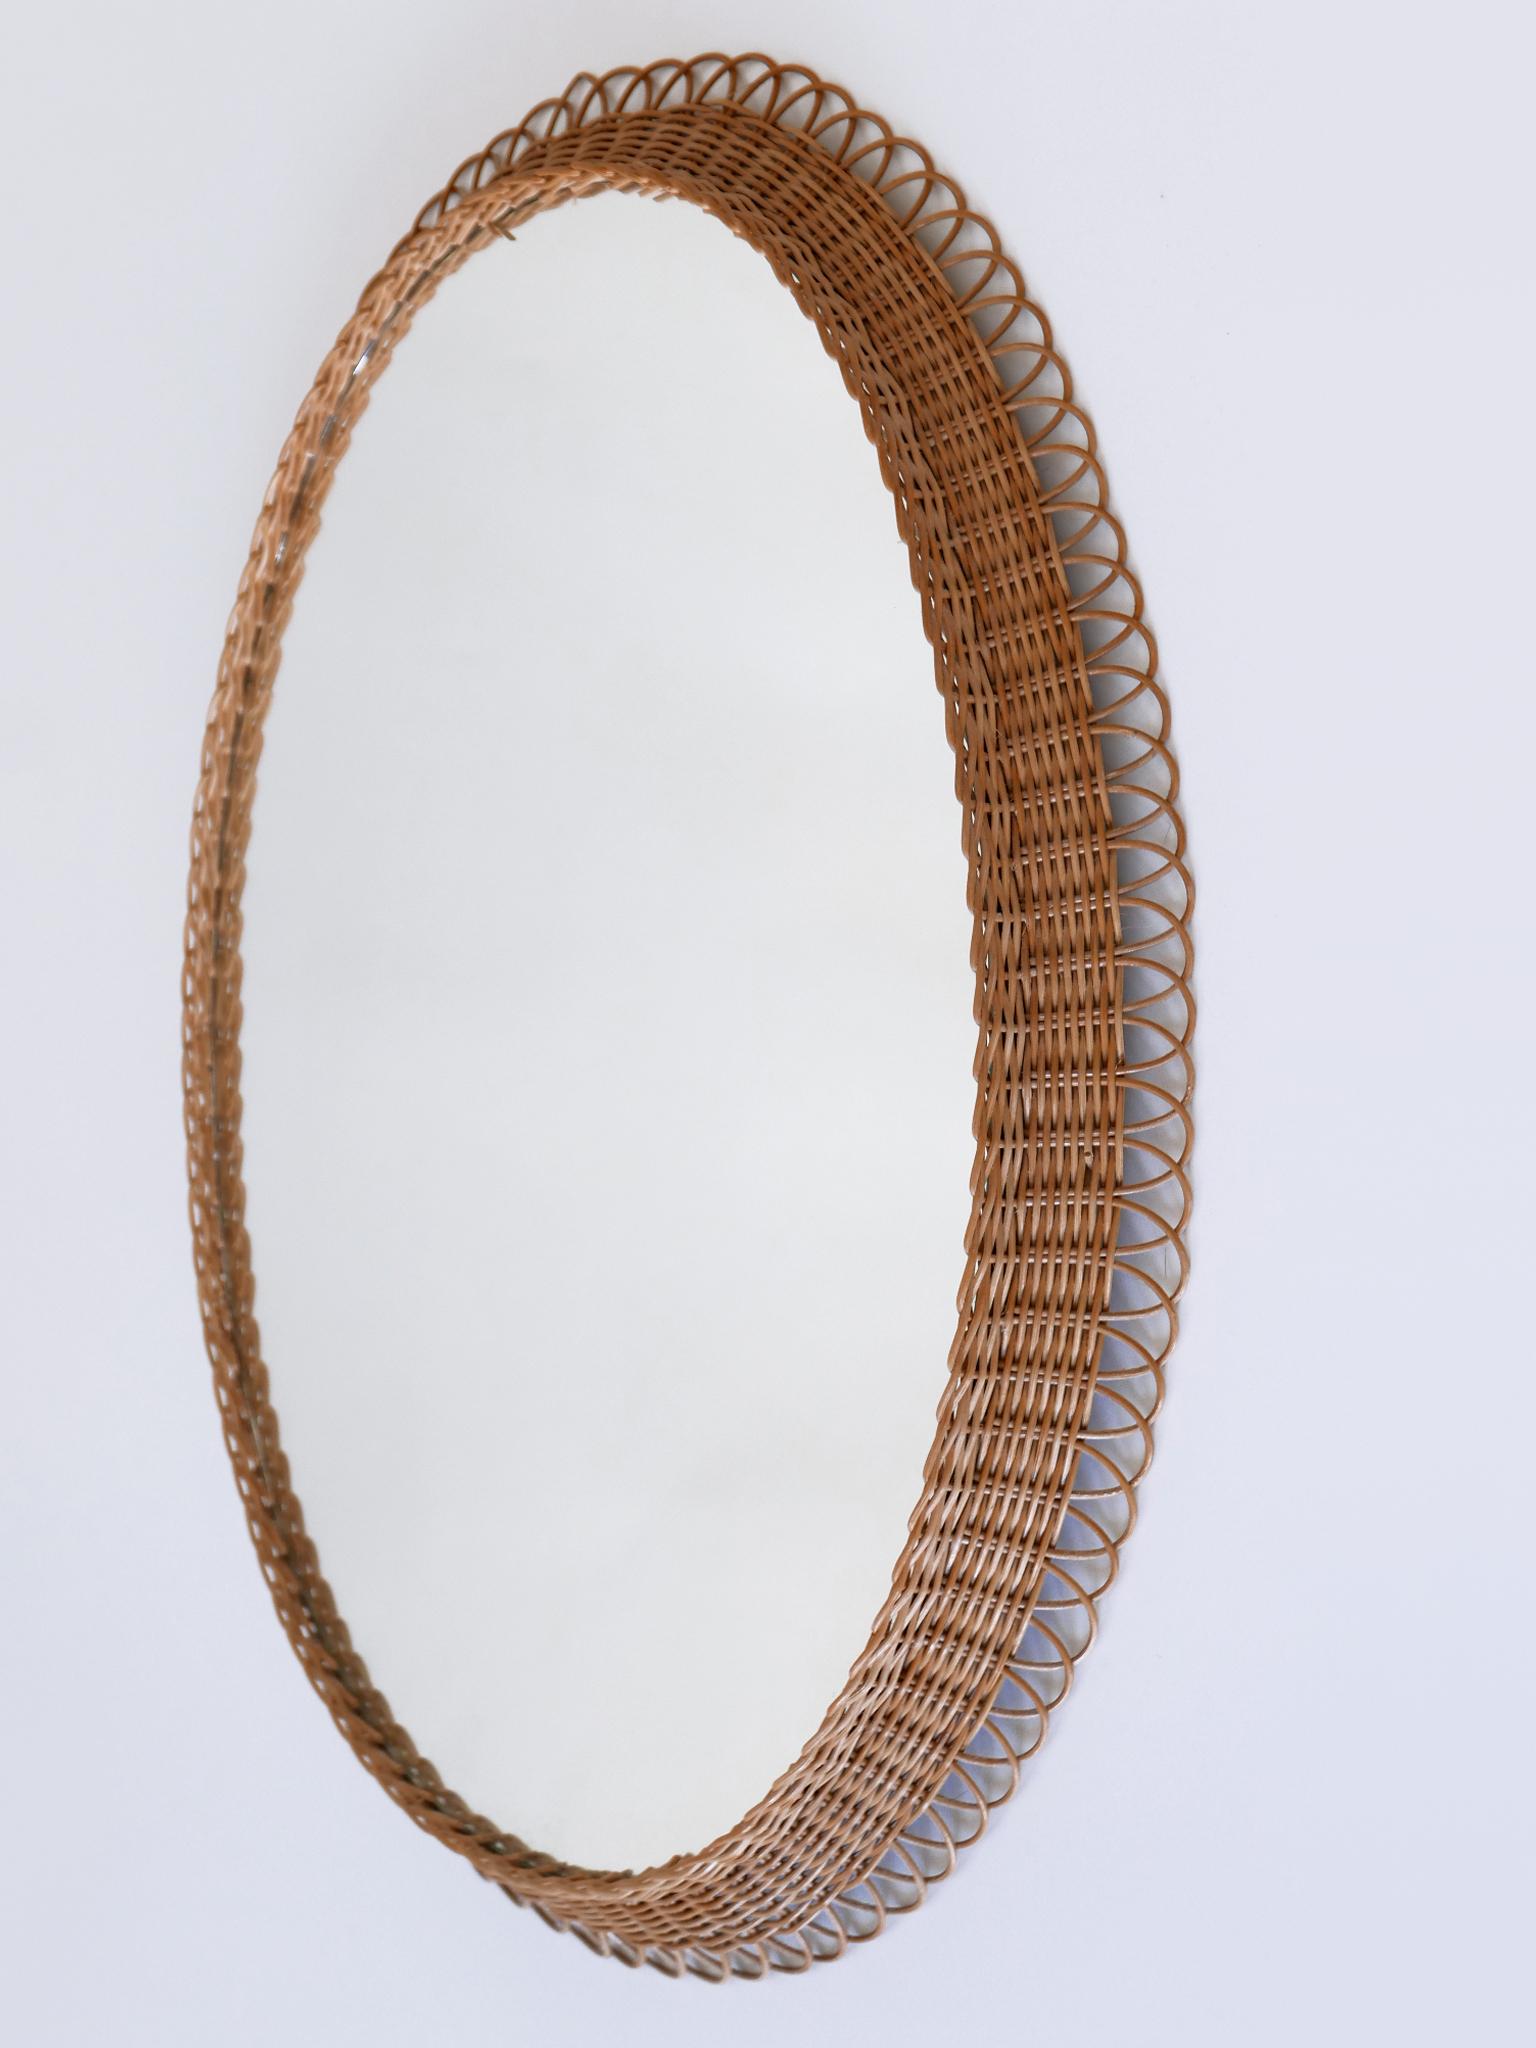 Decorative Mid-Century Modern Rattan Oval Wall Mirror Germany, 1960s For Sale 7